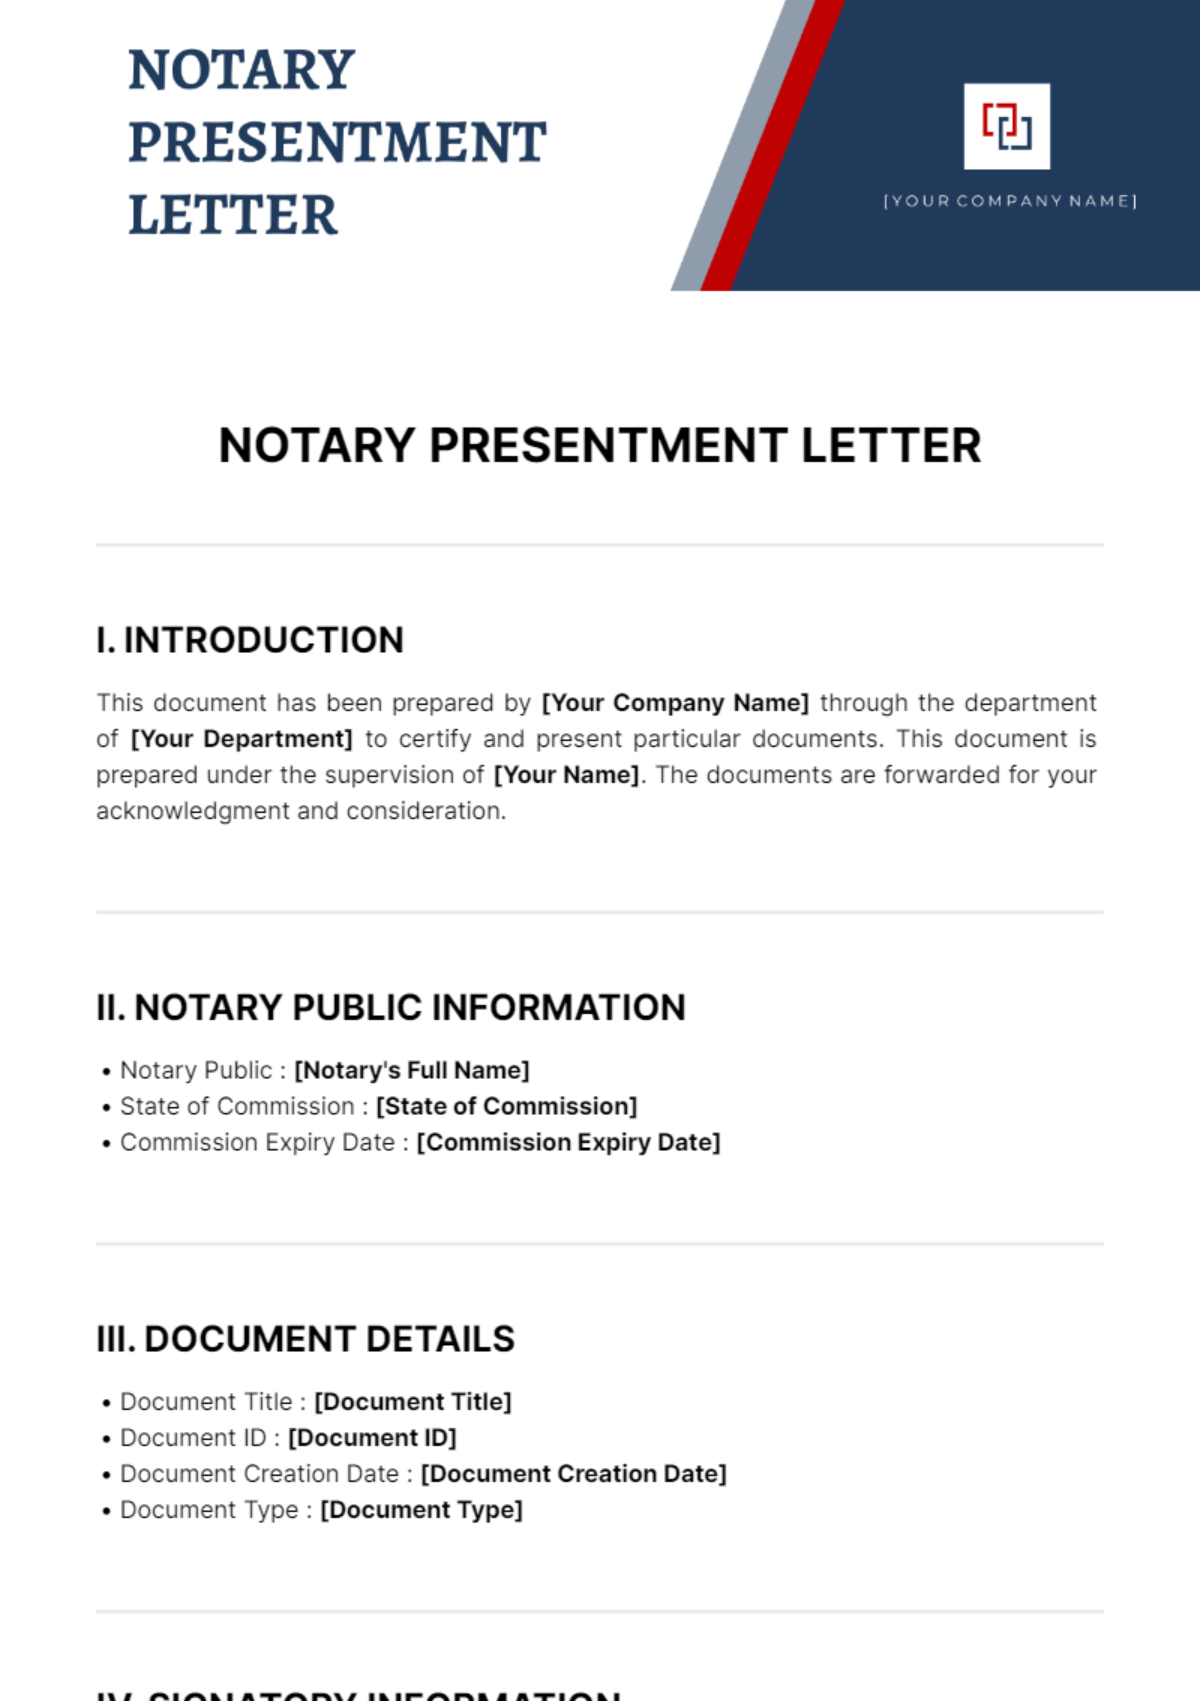 Free Notary Presentment Letter Template